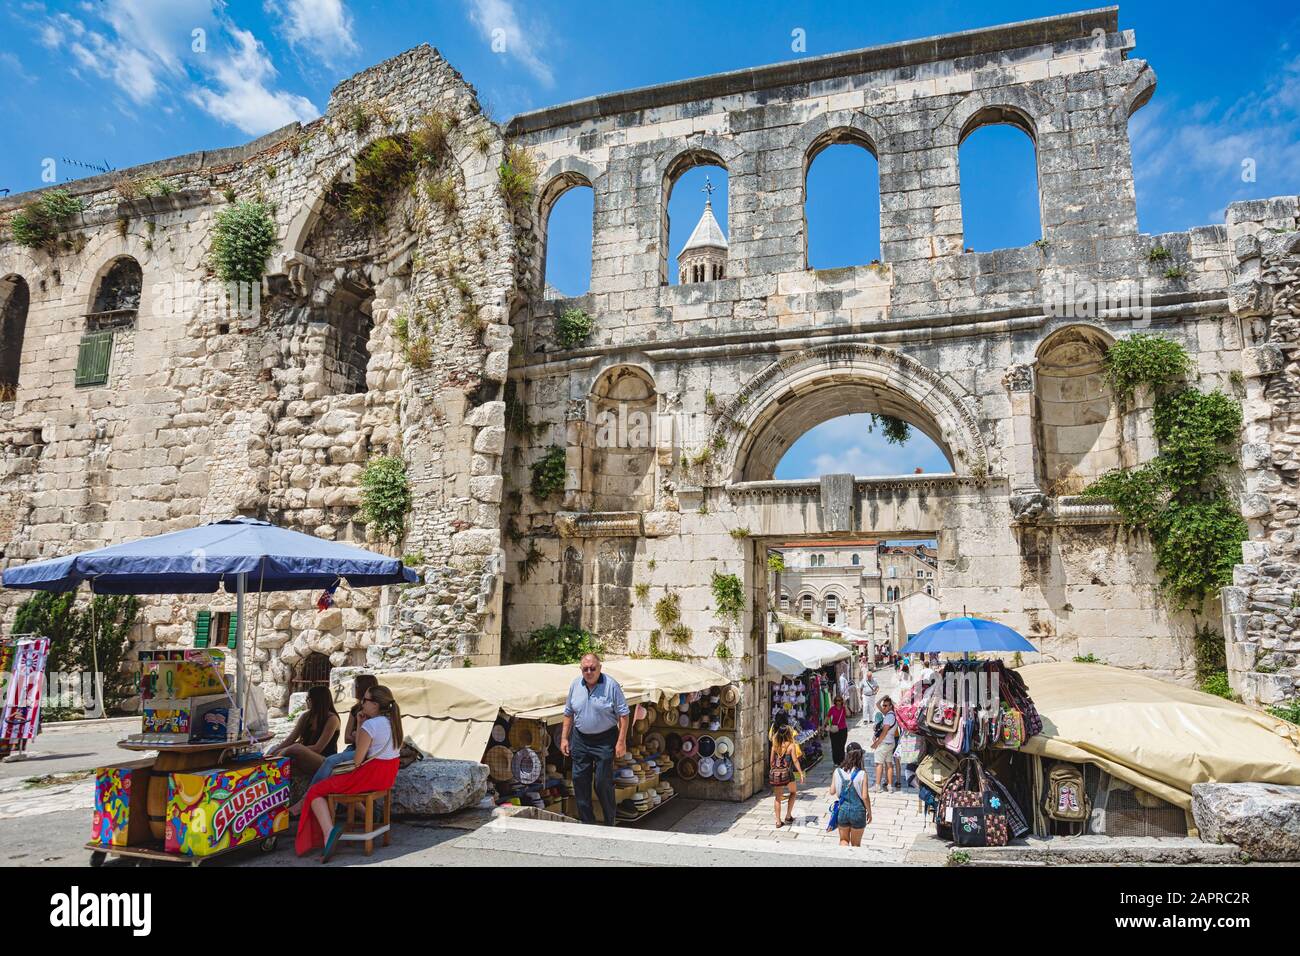 Split, Dalmatian Coast, Croatia.  The Eastern Gate to the Palace of Diocletian, also known as the Silver Gate.  The Historic Centre of Split is a UNES Stock Photo